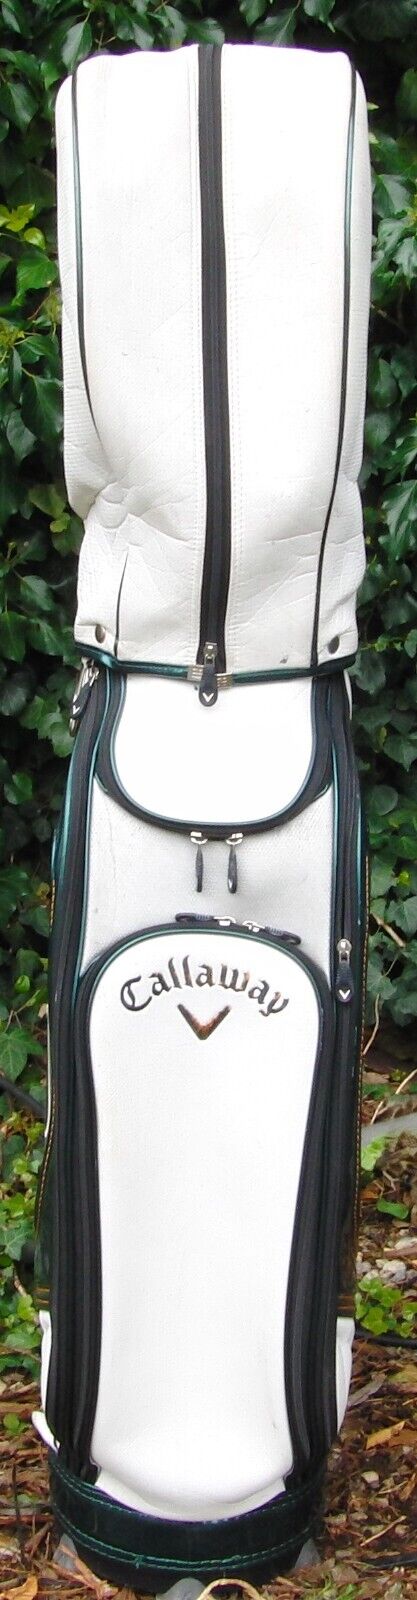 5 Division White/Green Callaway Cart Carry Golf Clubs Bag